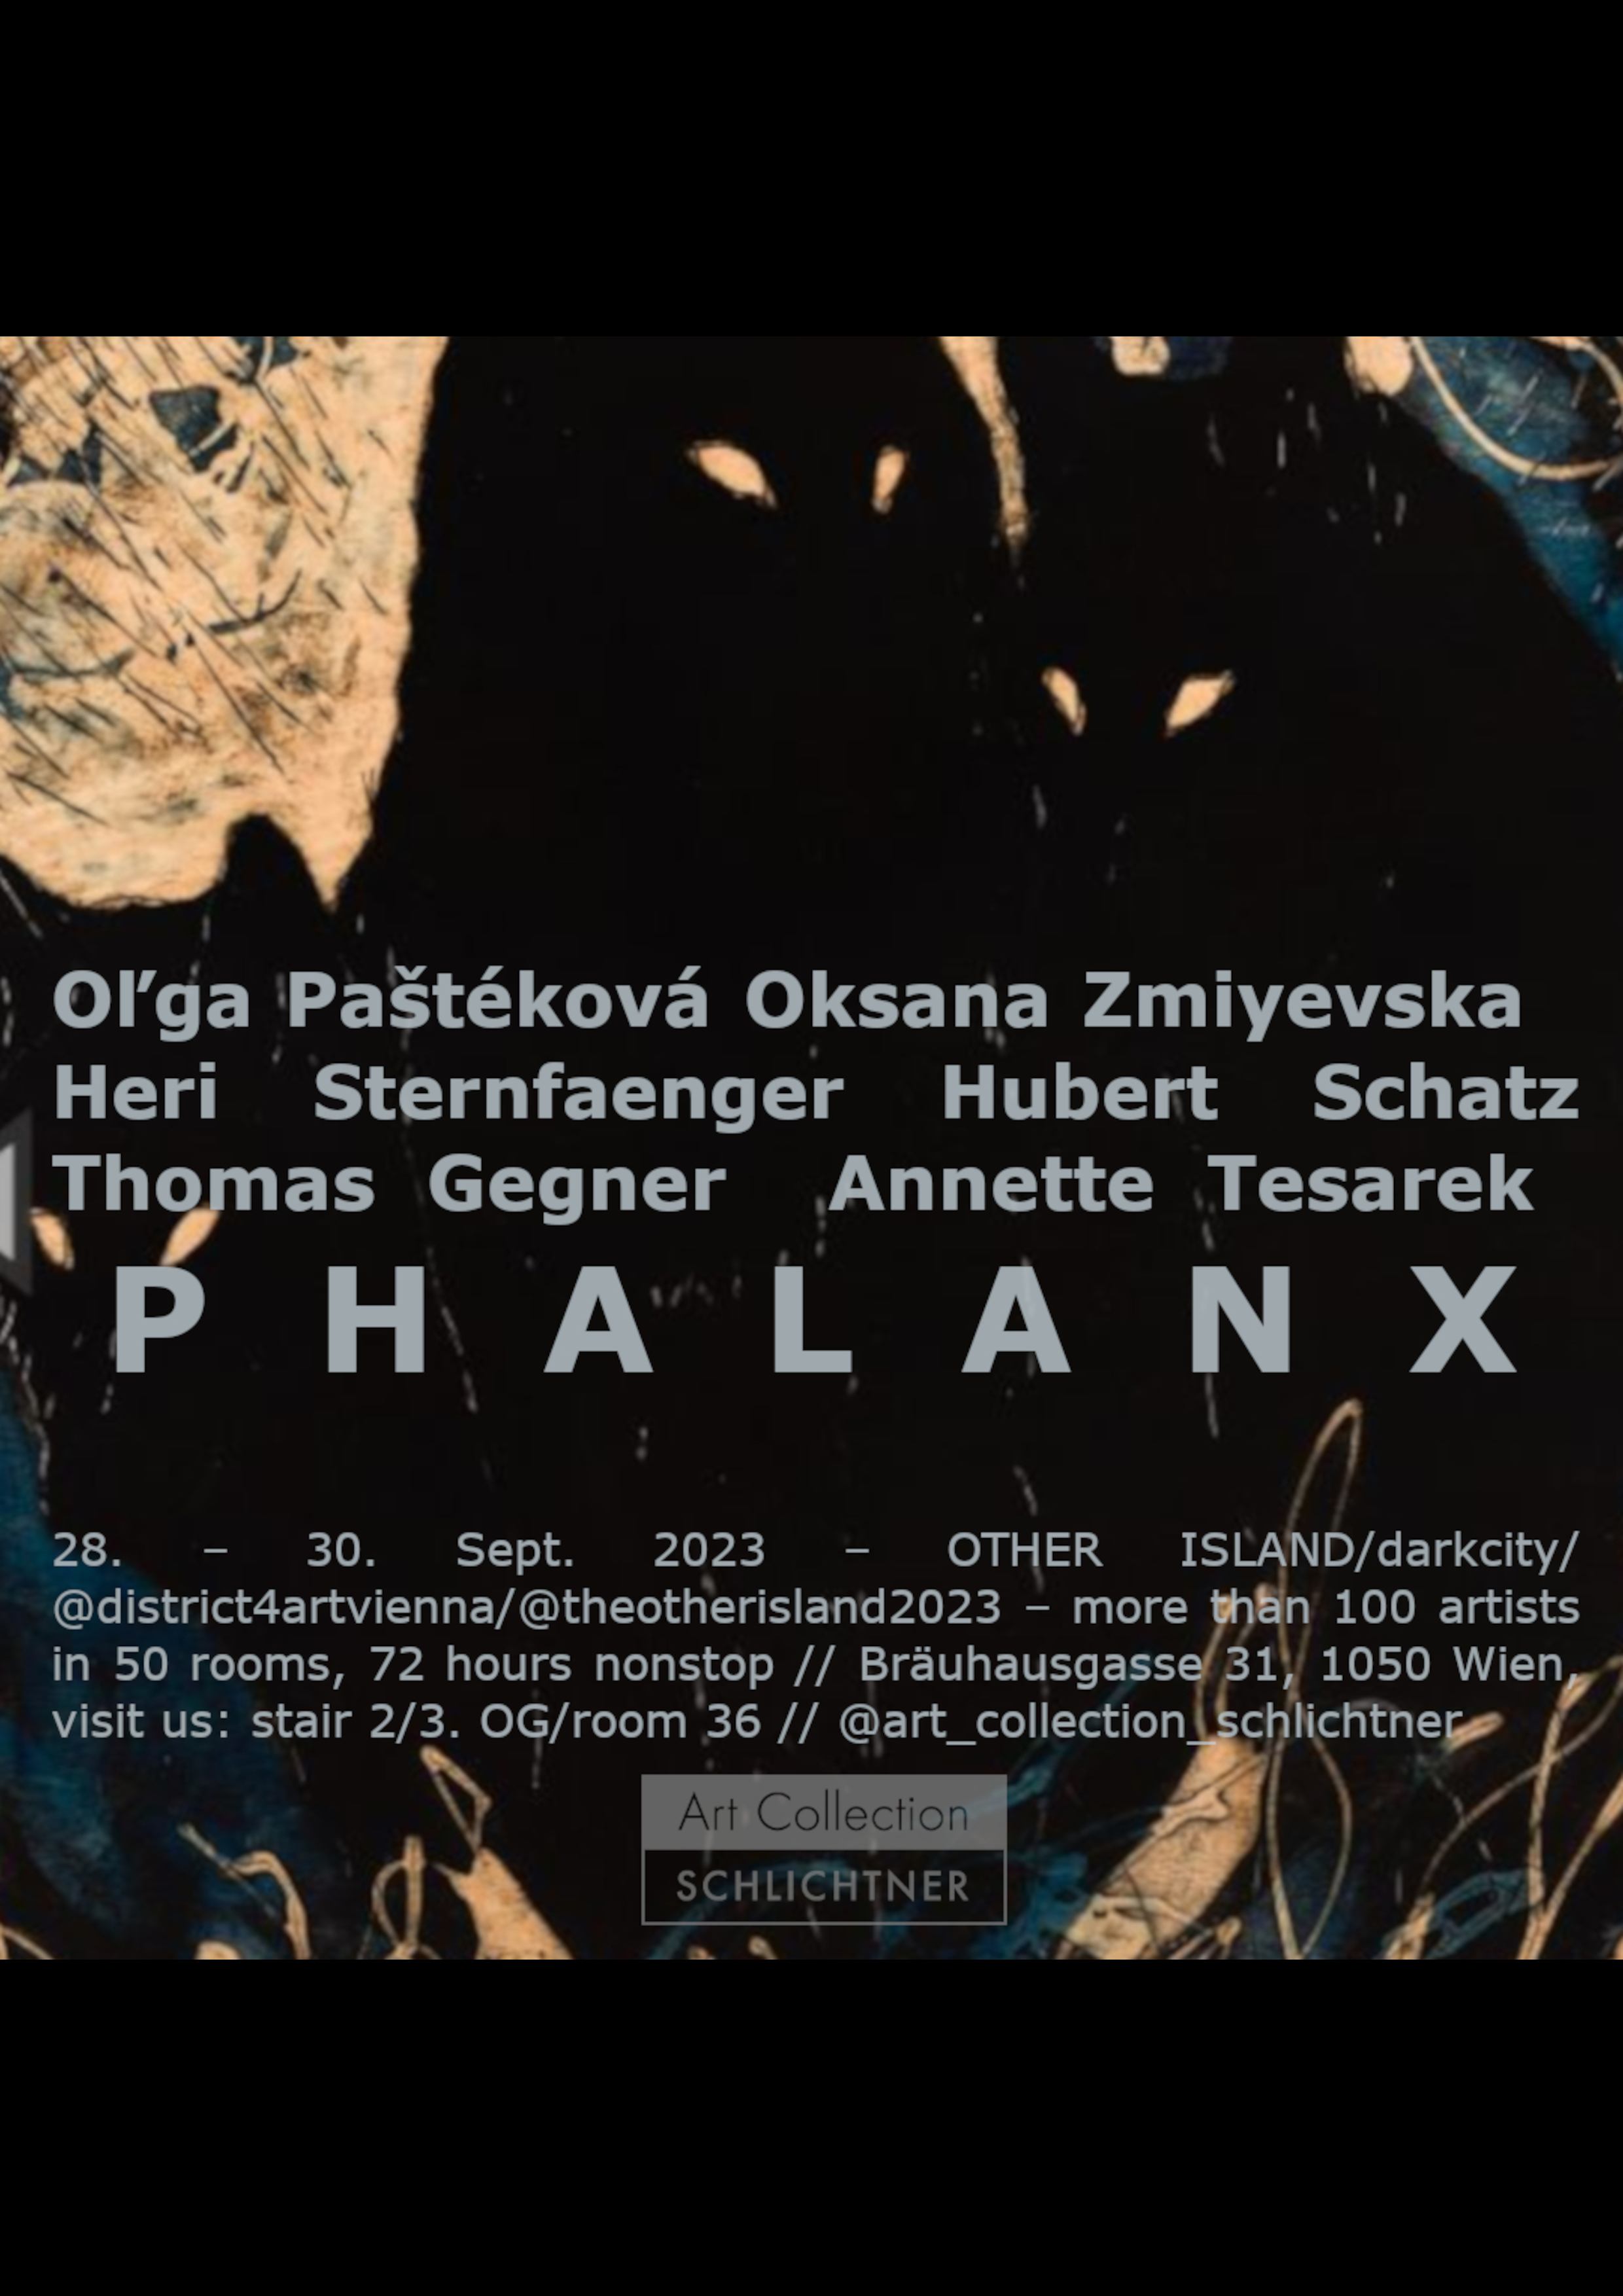 PHALANX – The Other Side (after Alfred Kubin) - 28.9.2023 - 30.9.2023 @THEOTHERISLAND2023